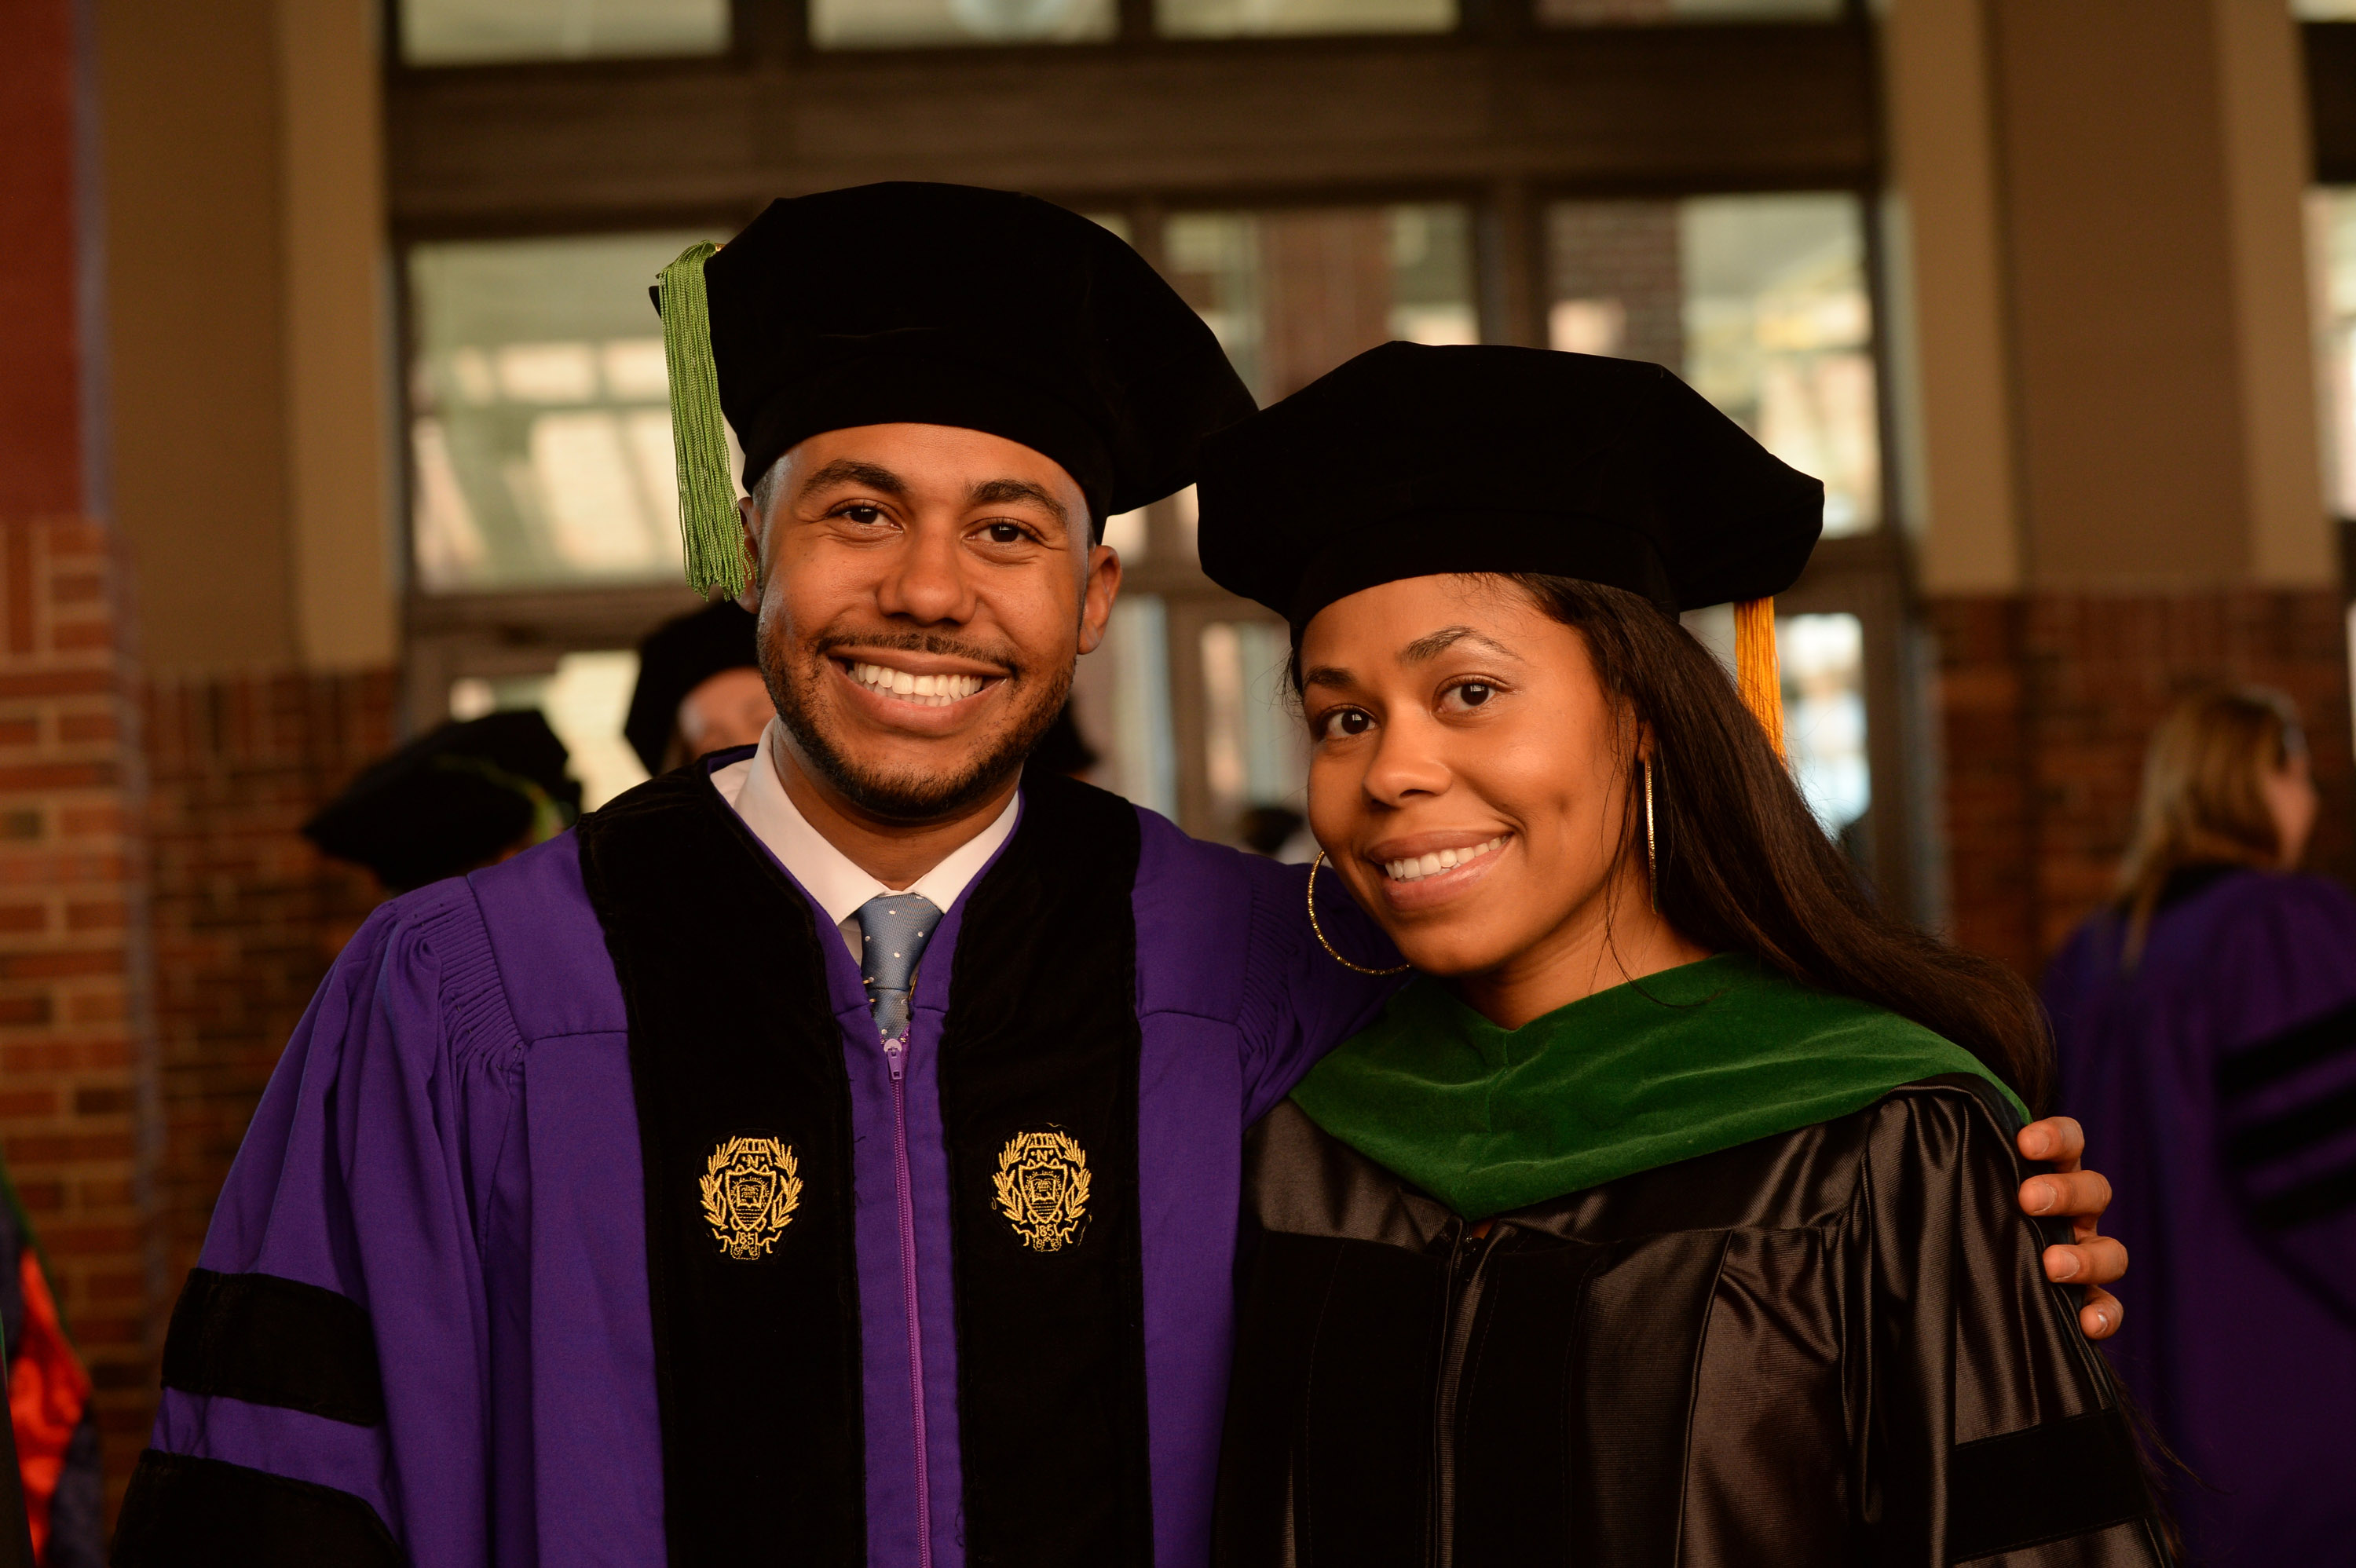 CHICAGO, IL - MAY 23:  The Feinberg School of Medicine at Northwestern University Class of 2016 hosted its Graduation Convocation on Monday, May 23, 2016, in the Aon Grand Ballroom of Navy Pier in Chicago, Illinois.  Photo credit: Randy Belice for Northwestern Medicine/Feinberg School of Medicine